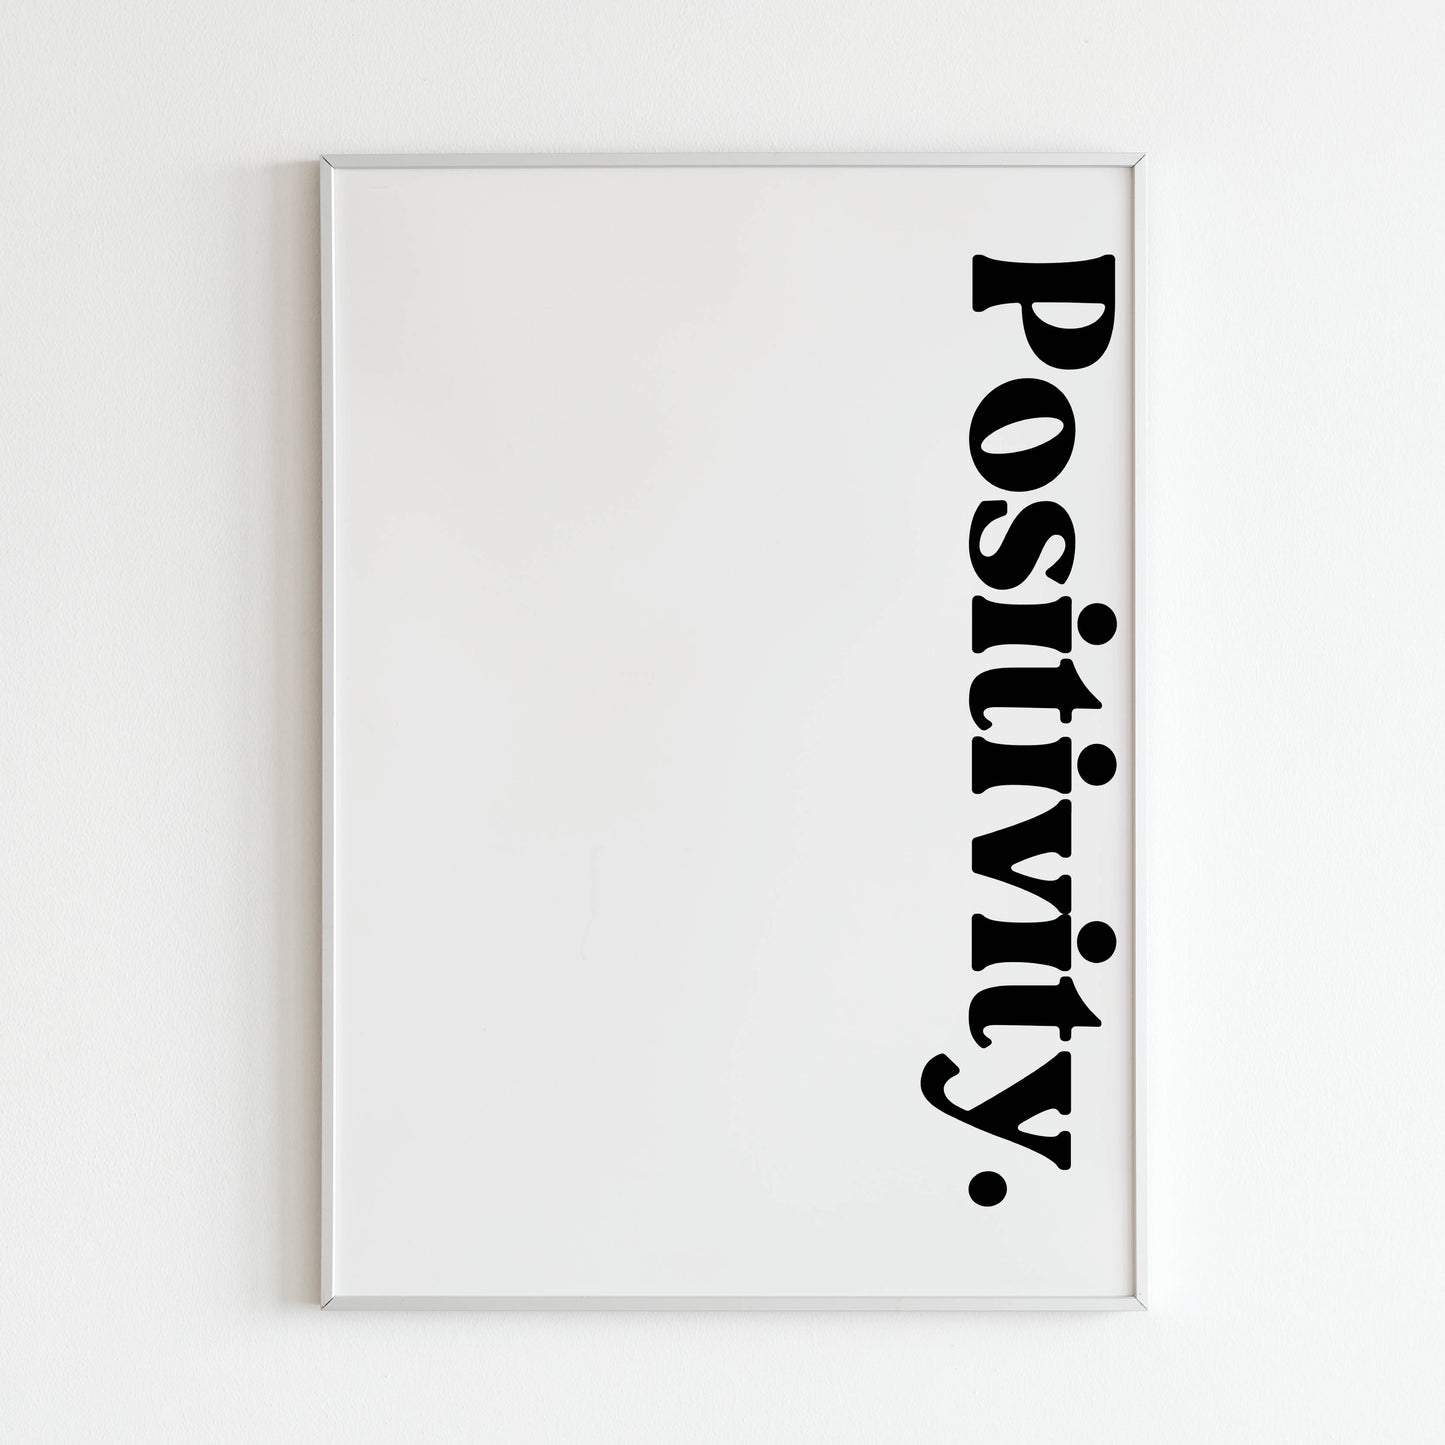 Positivity - Printed Wall Art / Poster. Bring a touch of optimism to your space with this uplifting poster. Arrives ready to hang.